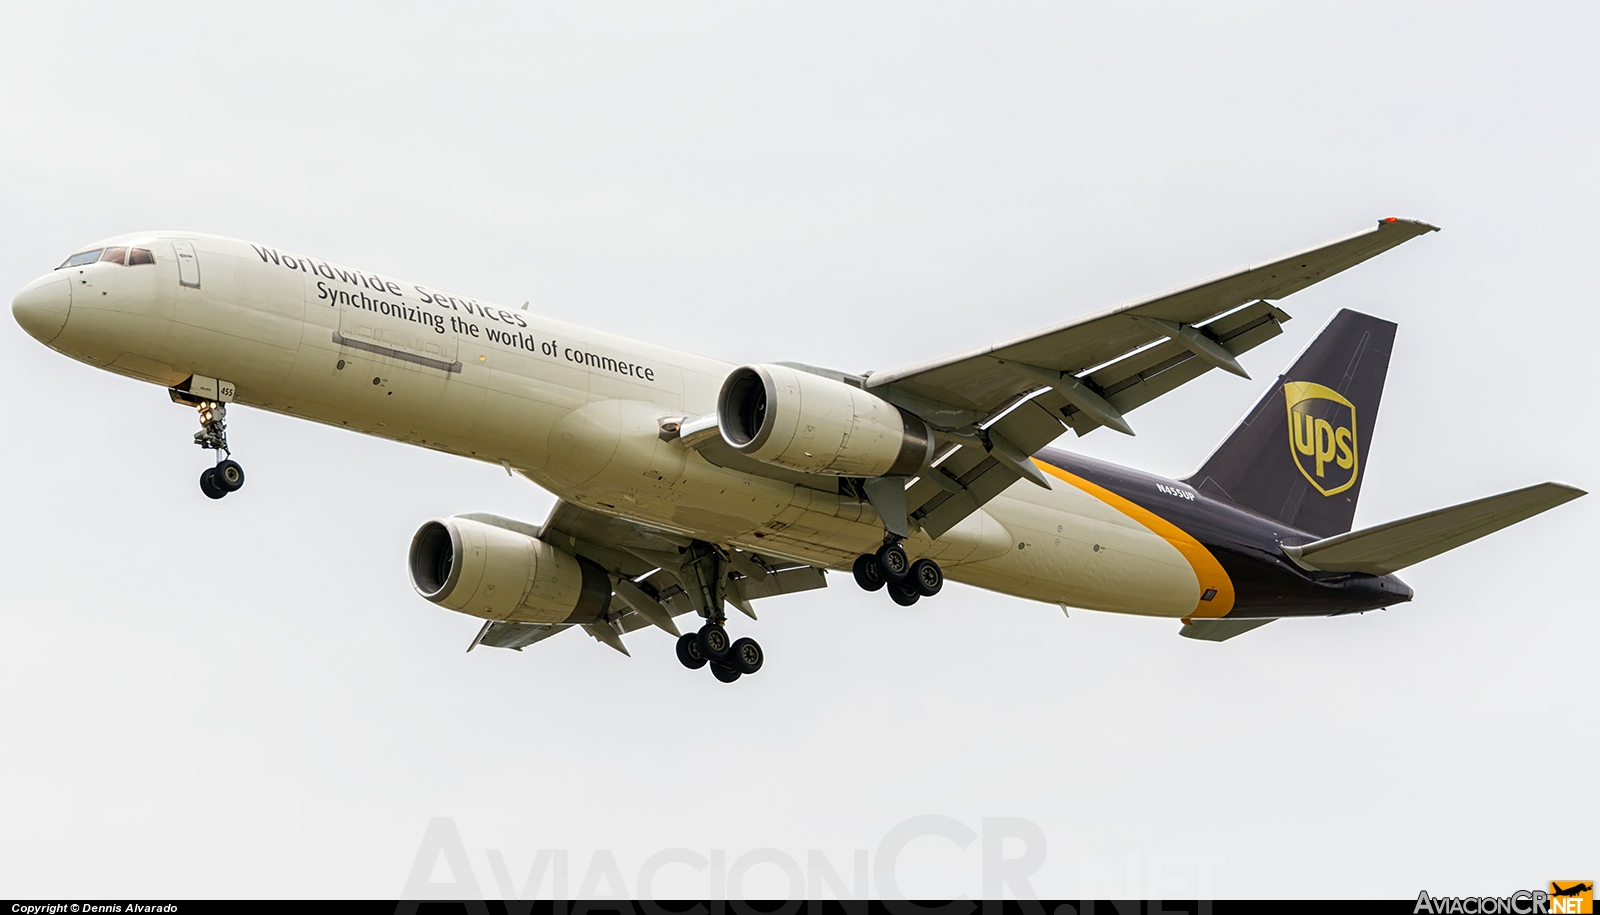 N455UP - Boeing 757-24A(PF) - United Parcel Service - UPS